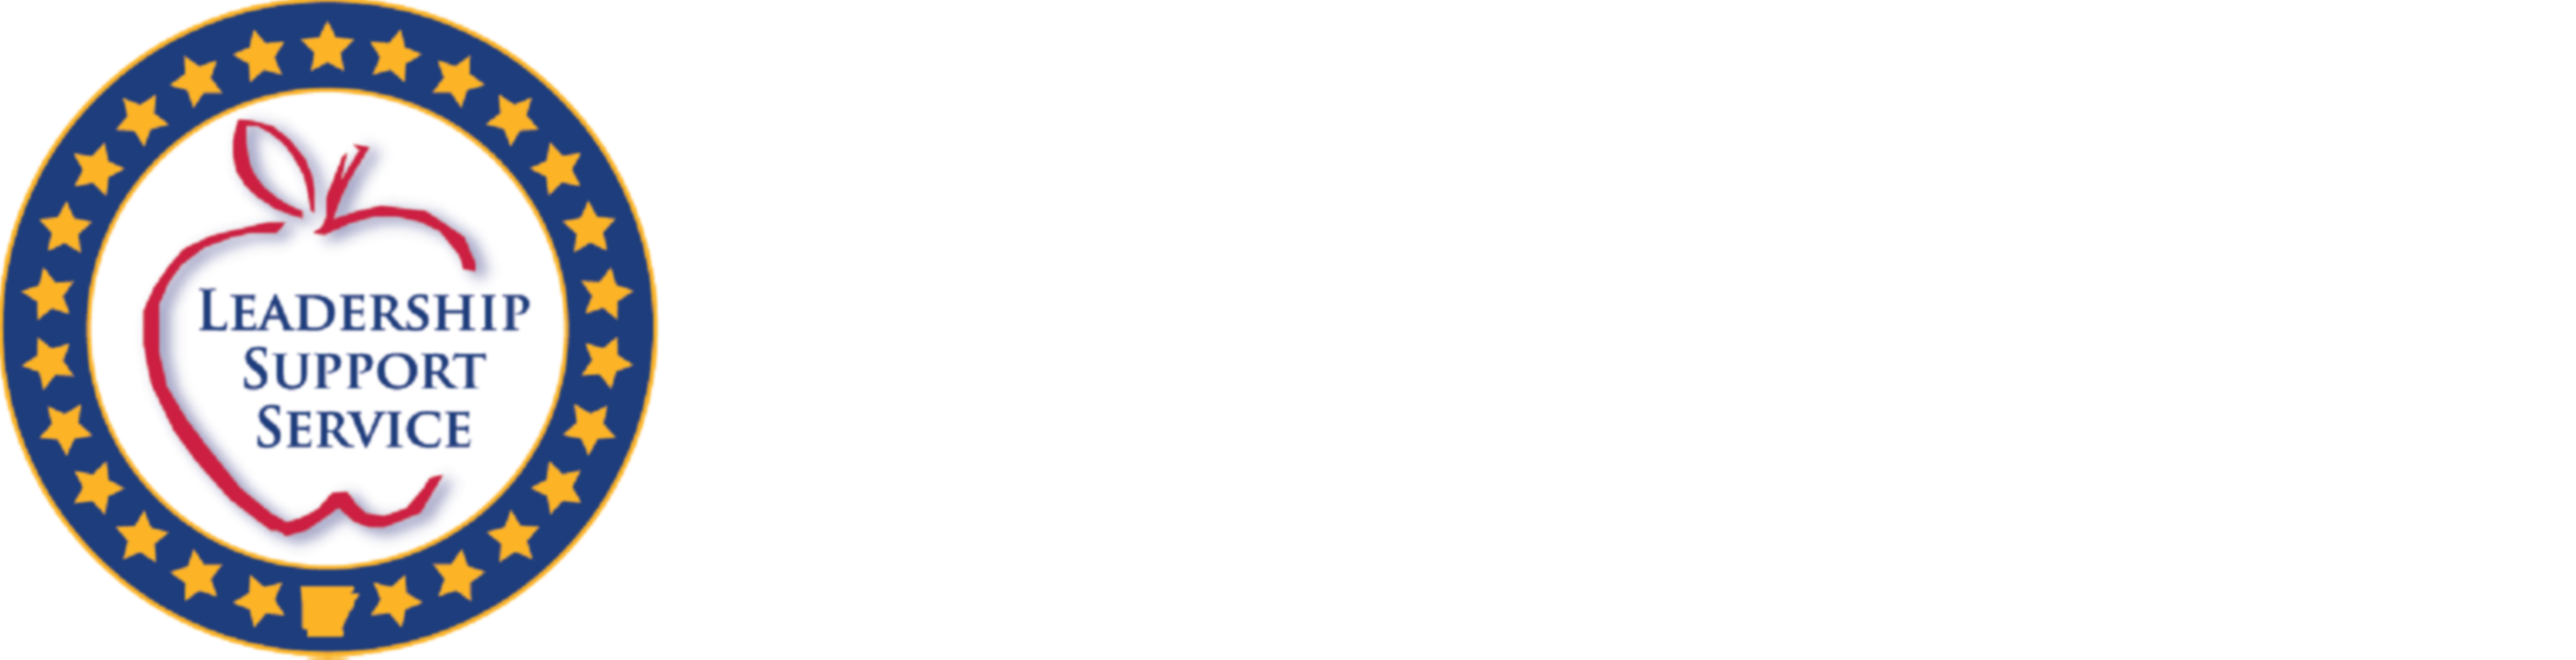 State Required Information icon